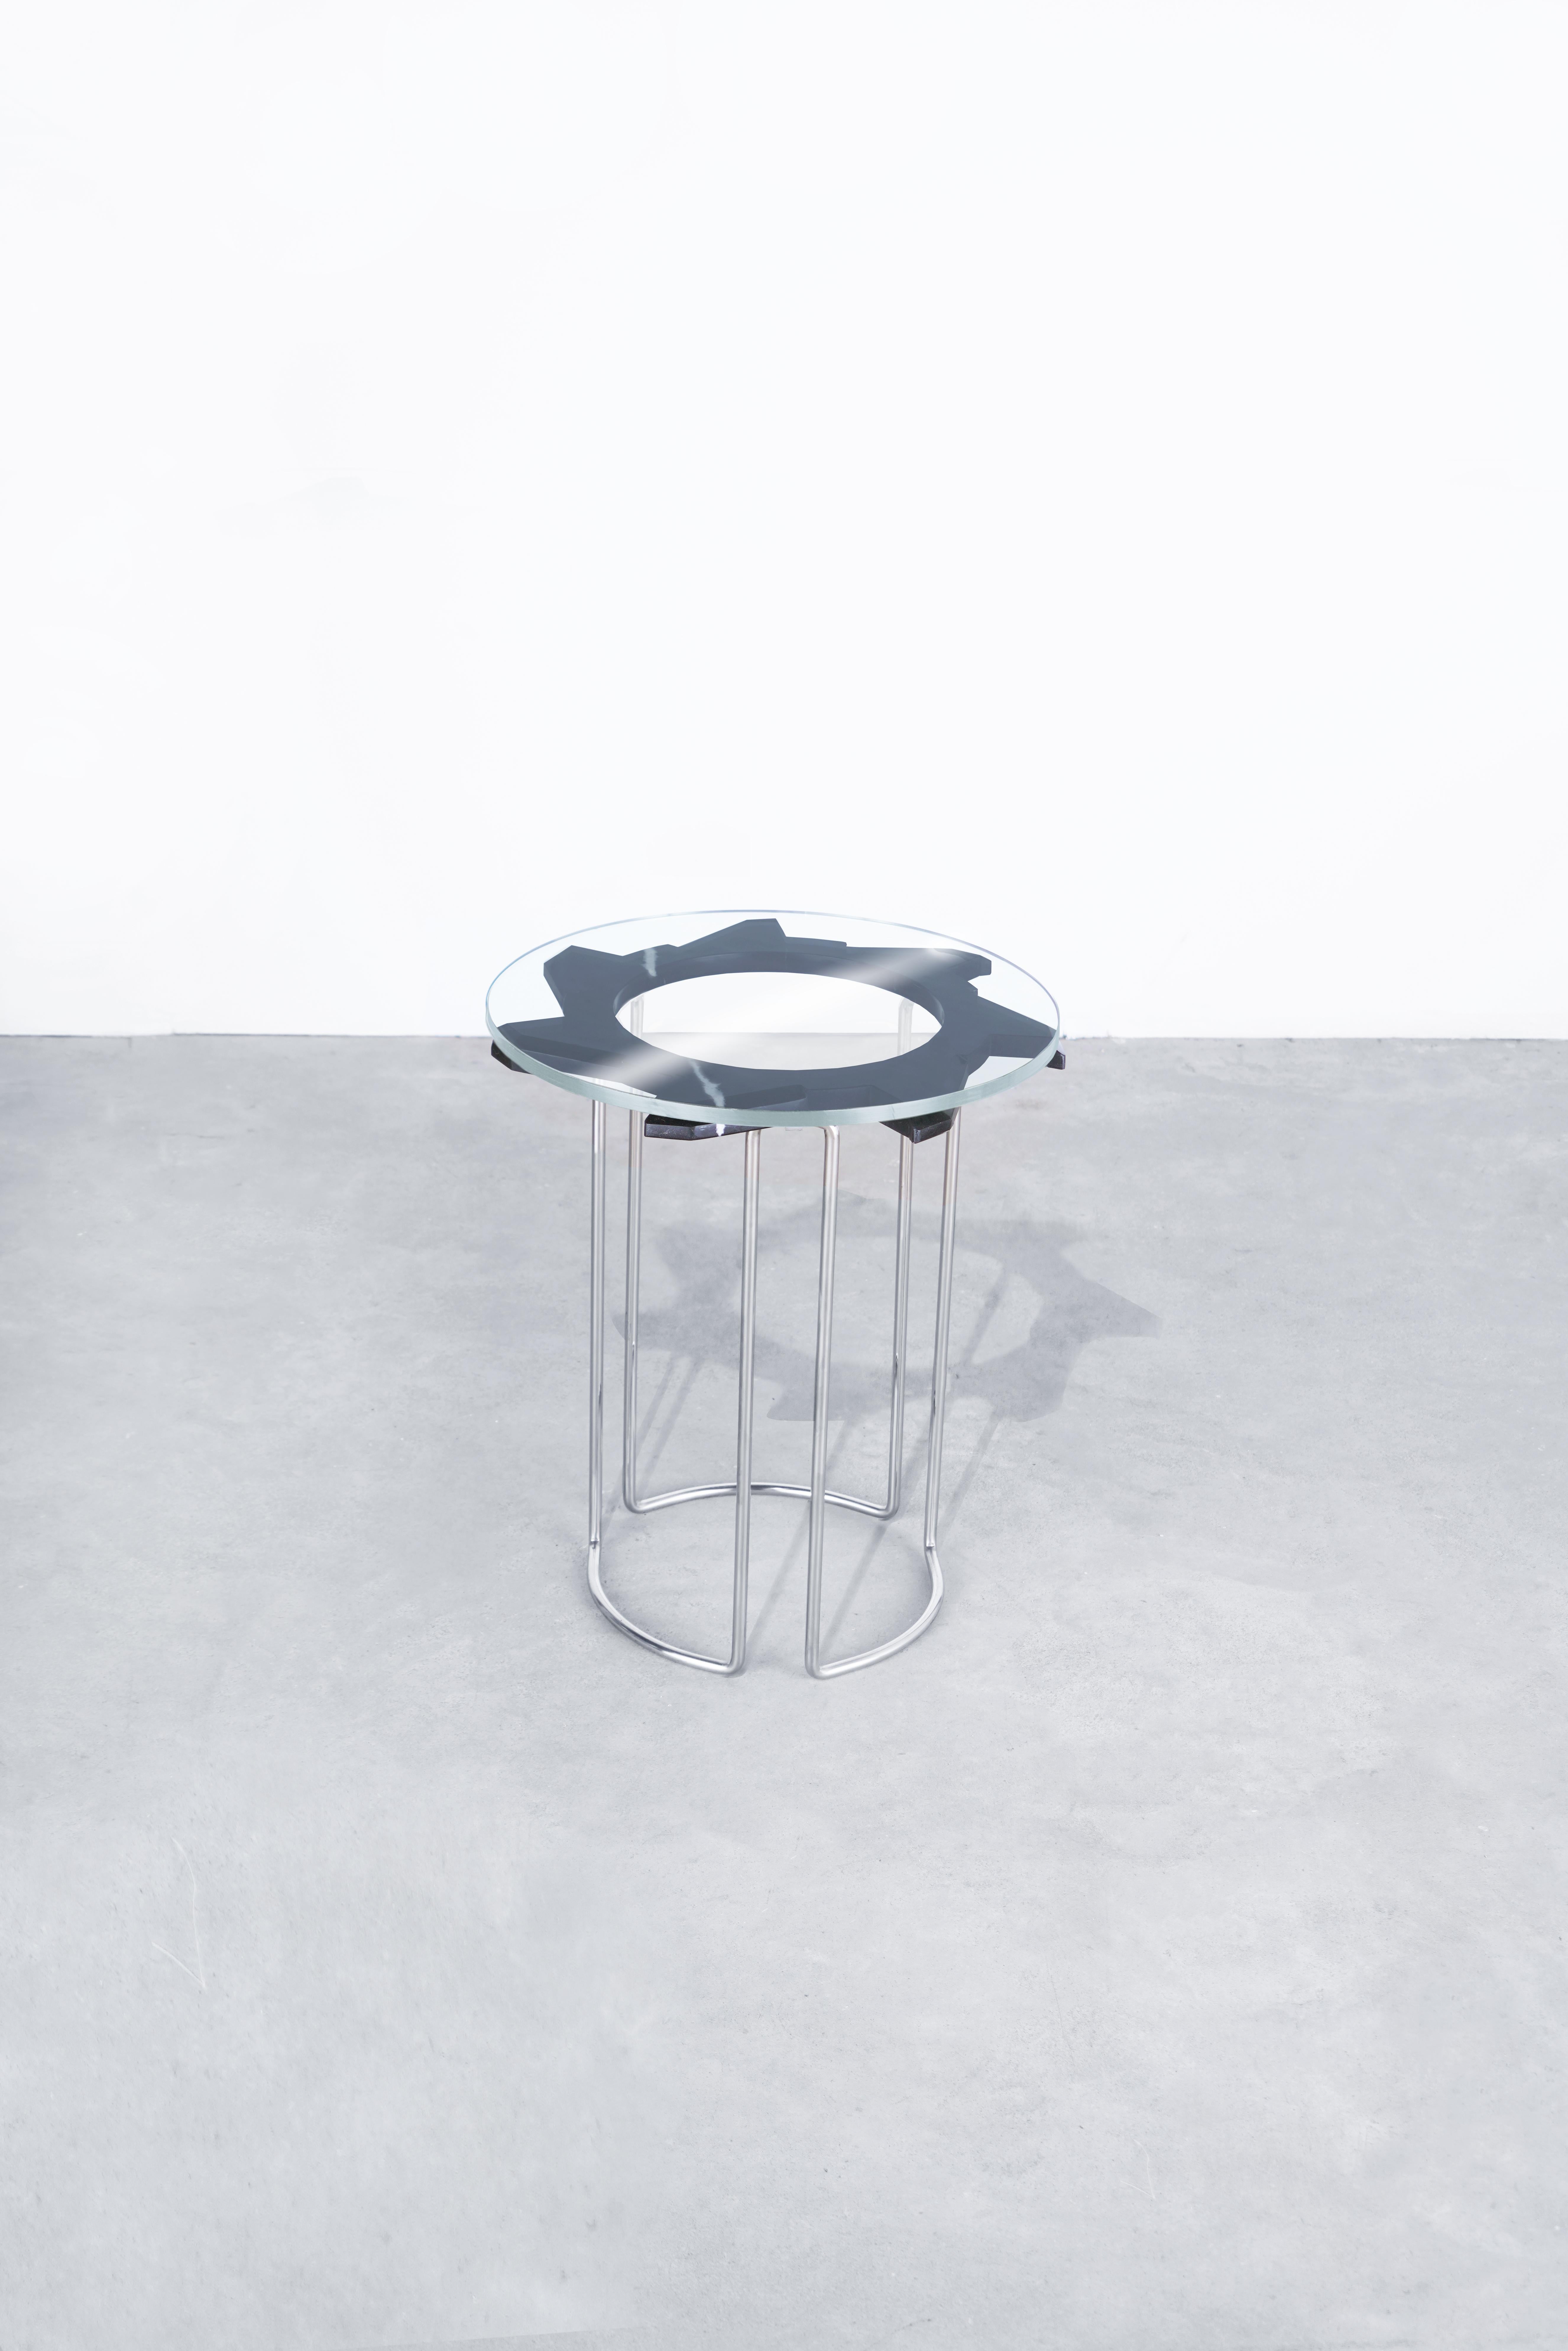 Description
Water jet cut, hand-beveled + hand-polished nero marquina marbletable, with tempered glass top. 
Hand-formed + hand-polished stainless steel legs, welded into one continuous table base. 
Starphire glass top. 
Position alone, or nest